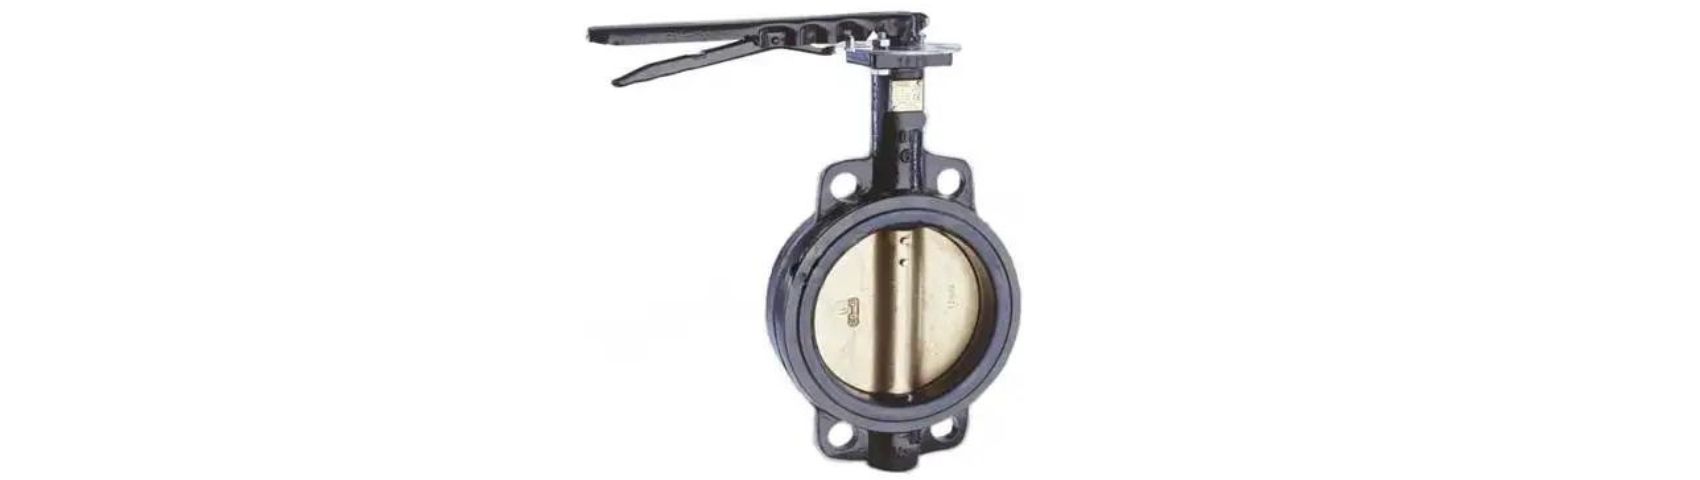 When Can Butterfly Valves Be Used As Control Valves?